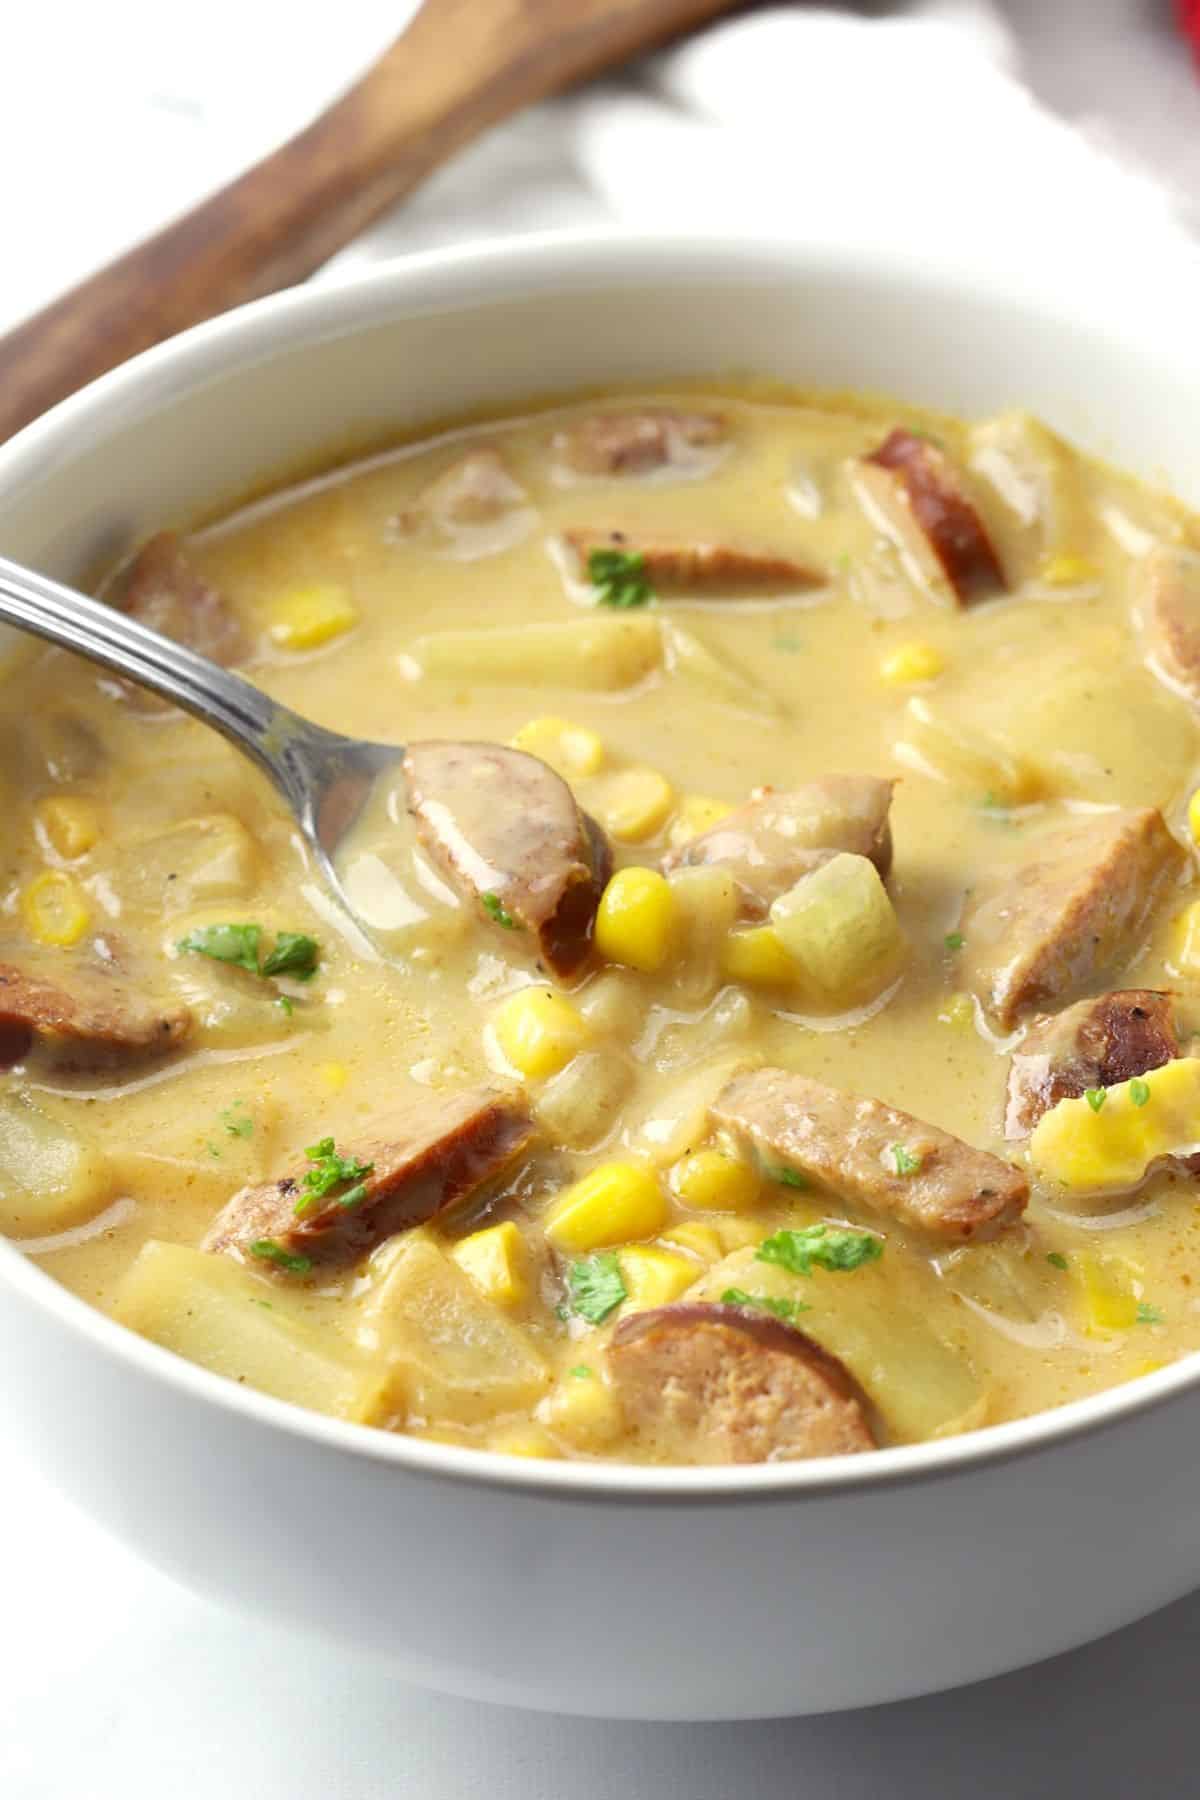 Creamy corn chowder with andouille sausage in a white bowl with a spoon.